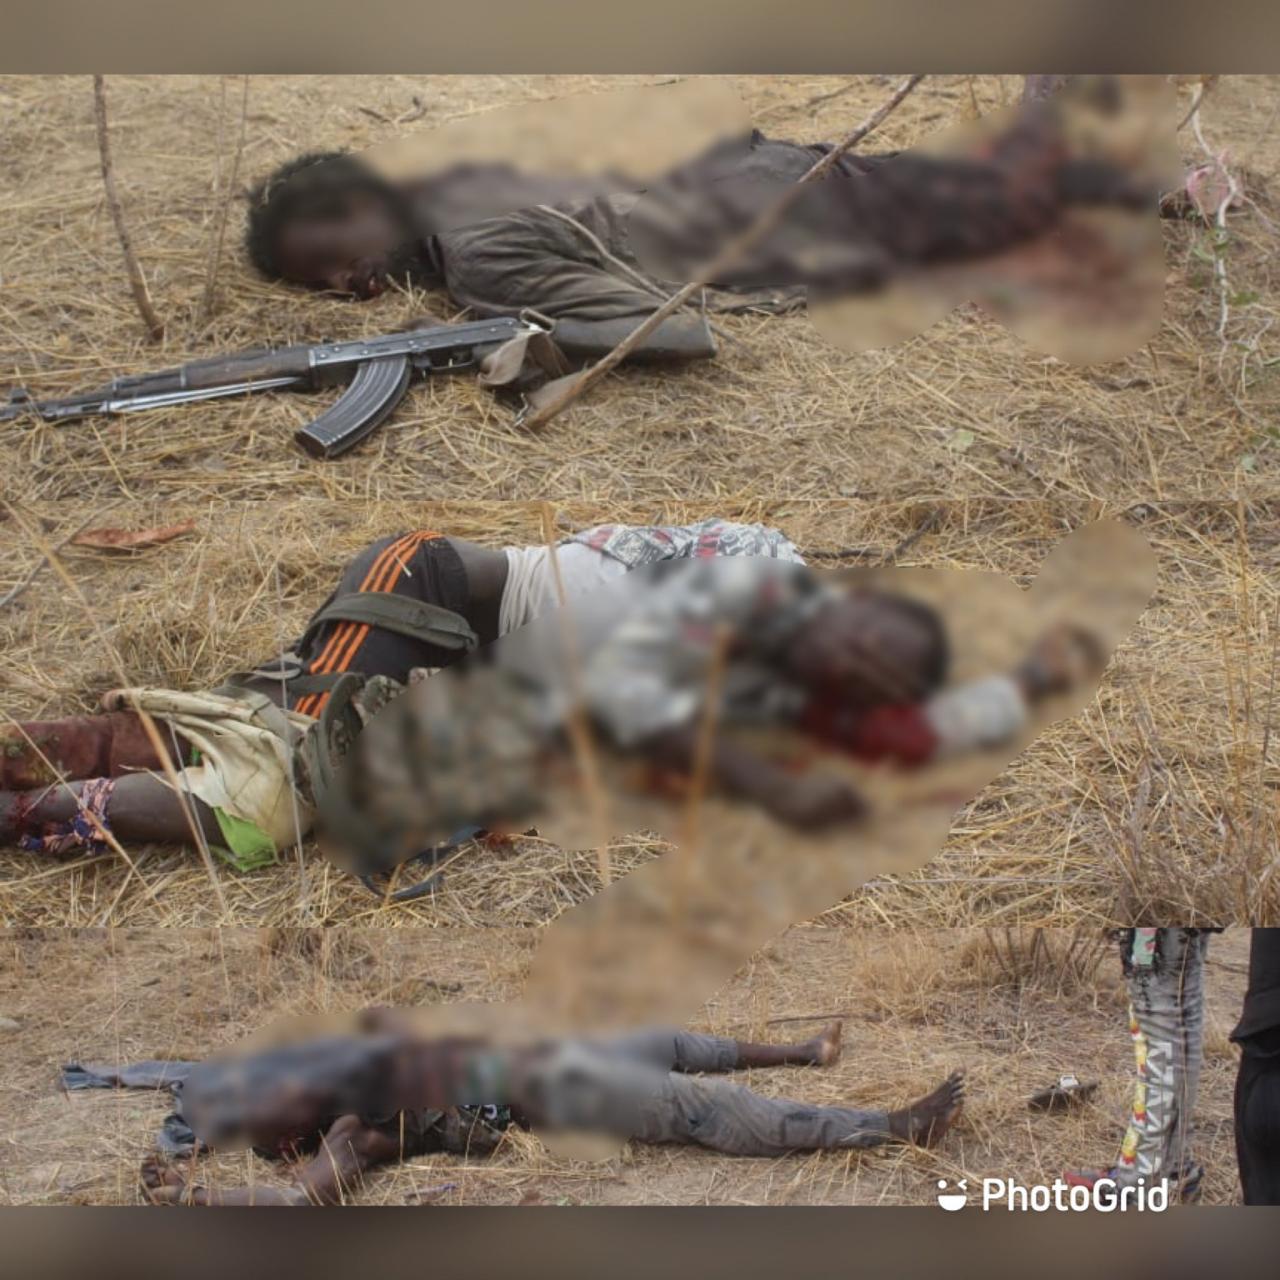 Nigerian forces kill ISWAP terrorists, destroy market and camps in Borno